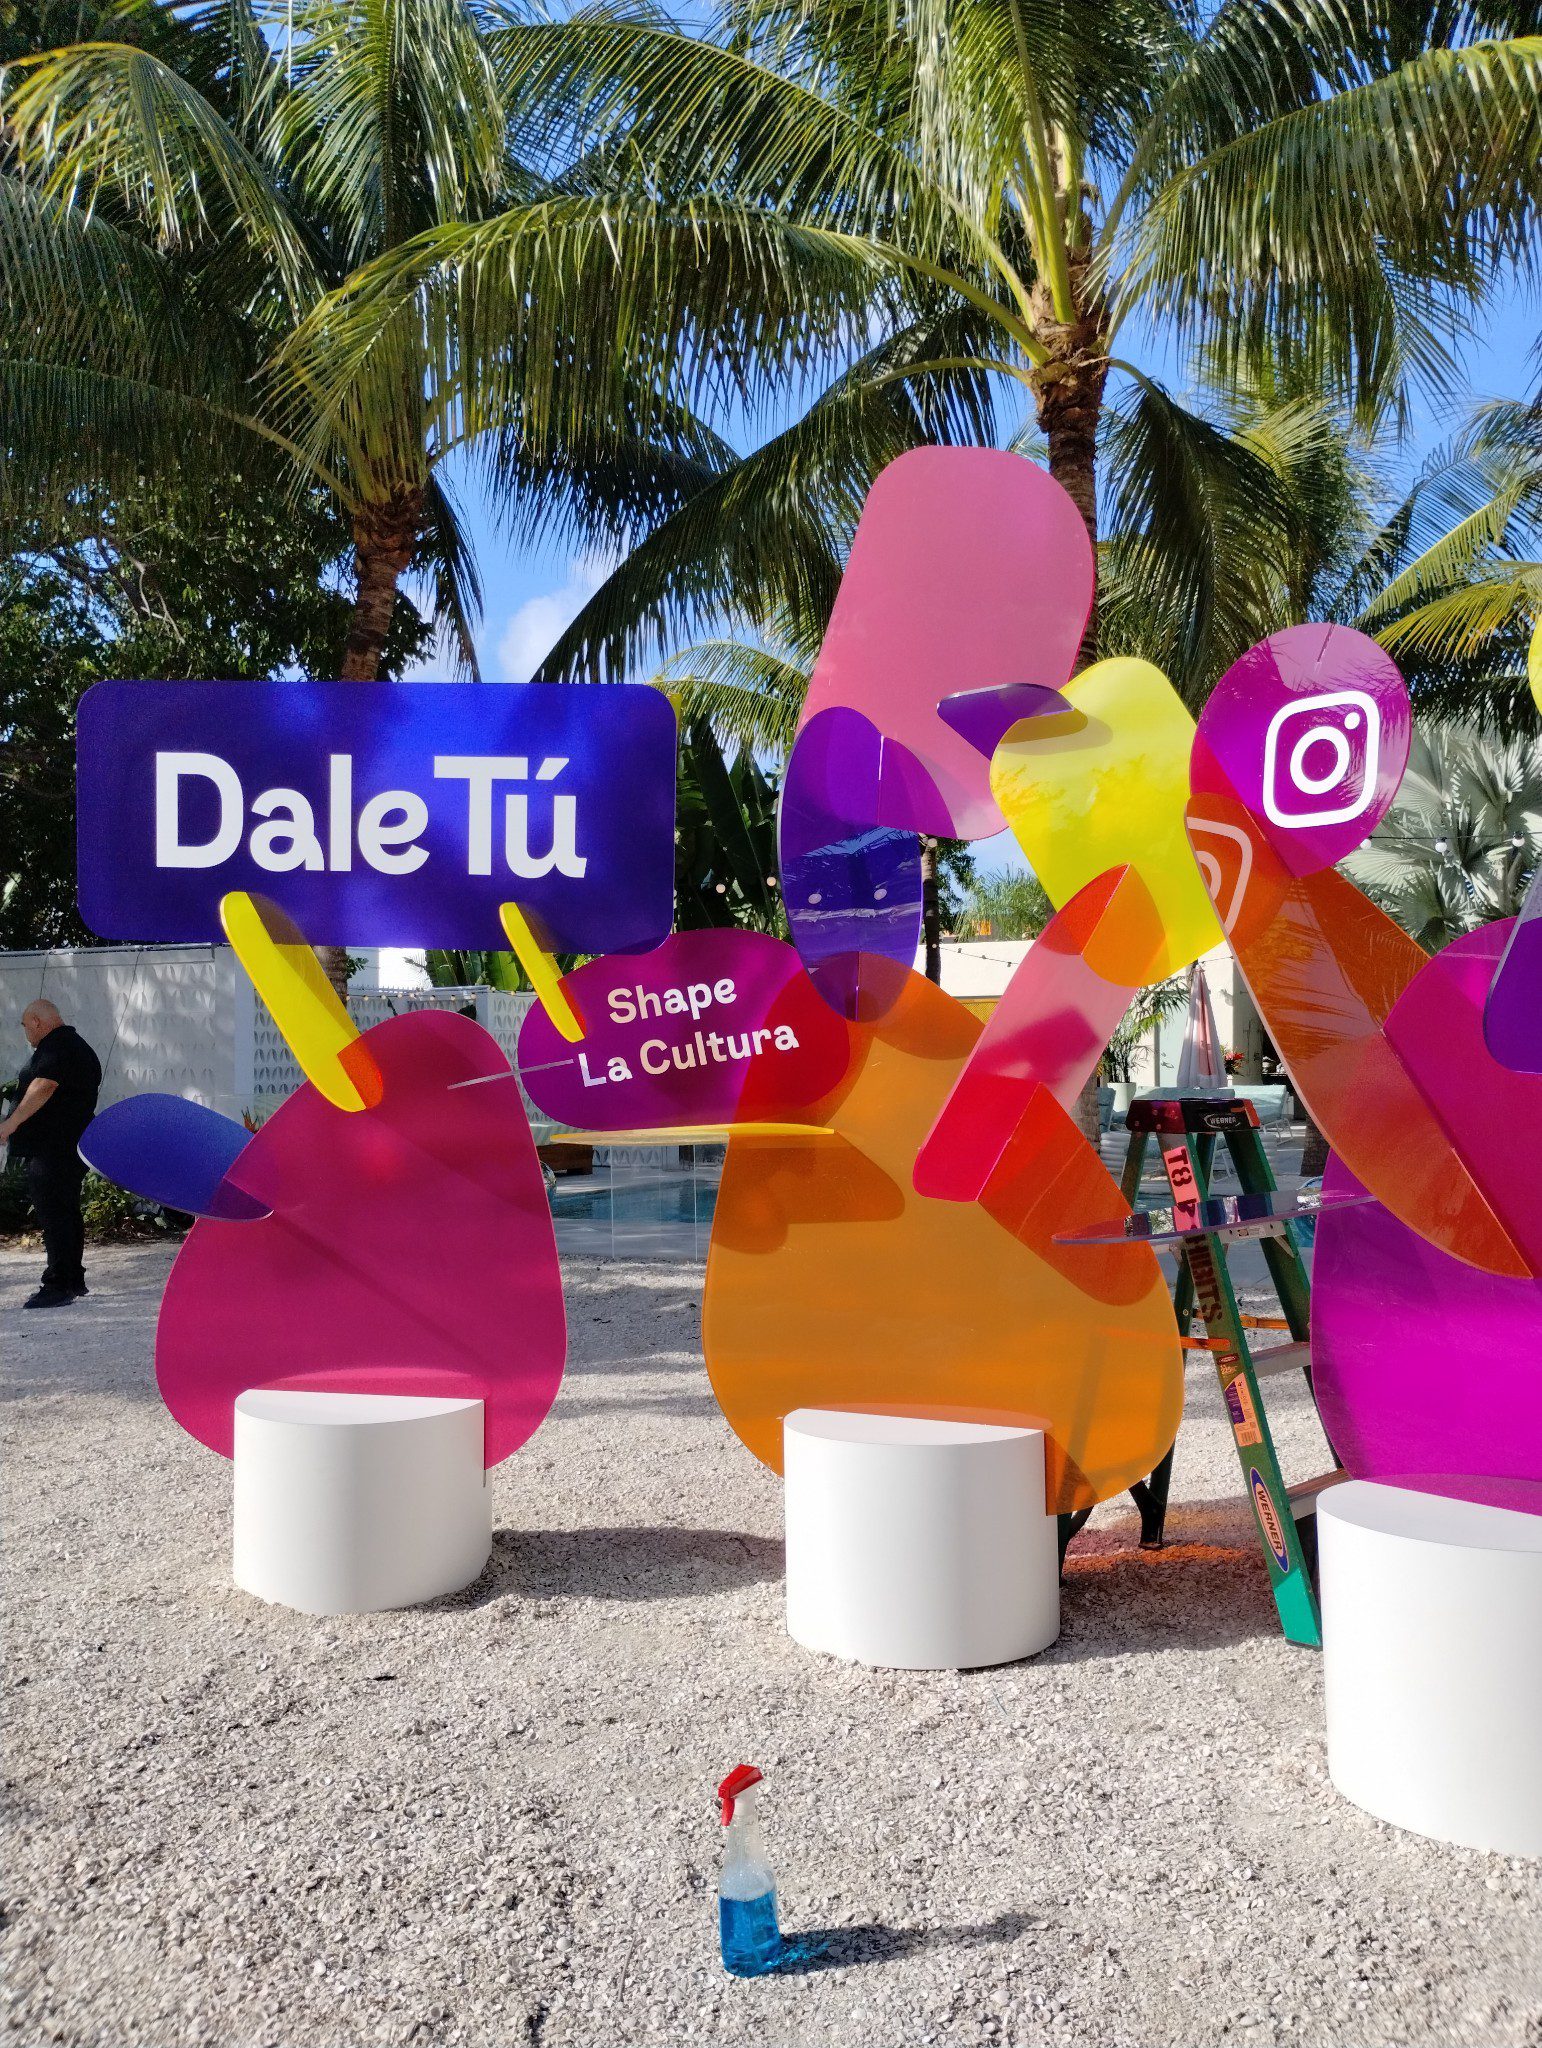 A free-standing acrylic display with colorful printing on clear acrylic, placed on a beach.